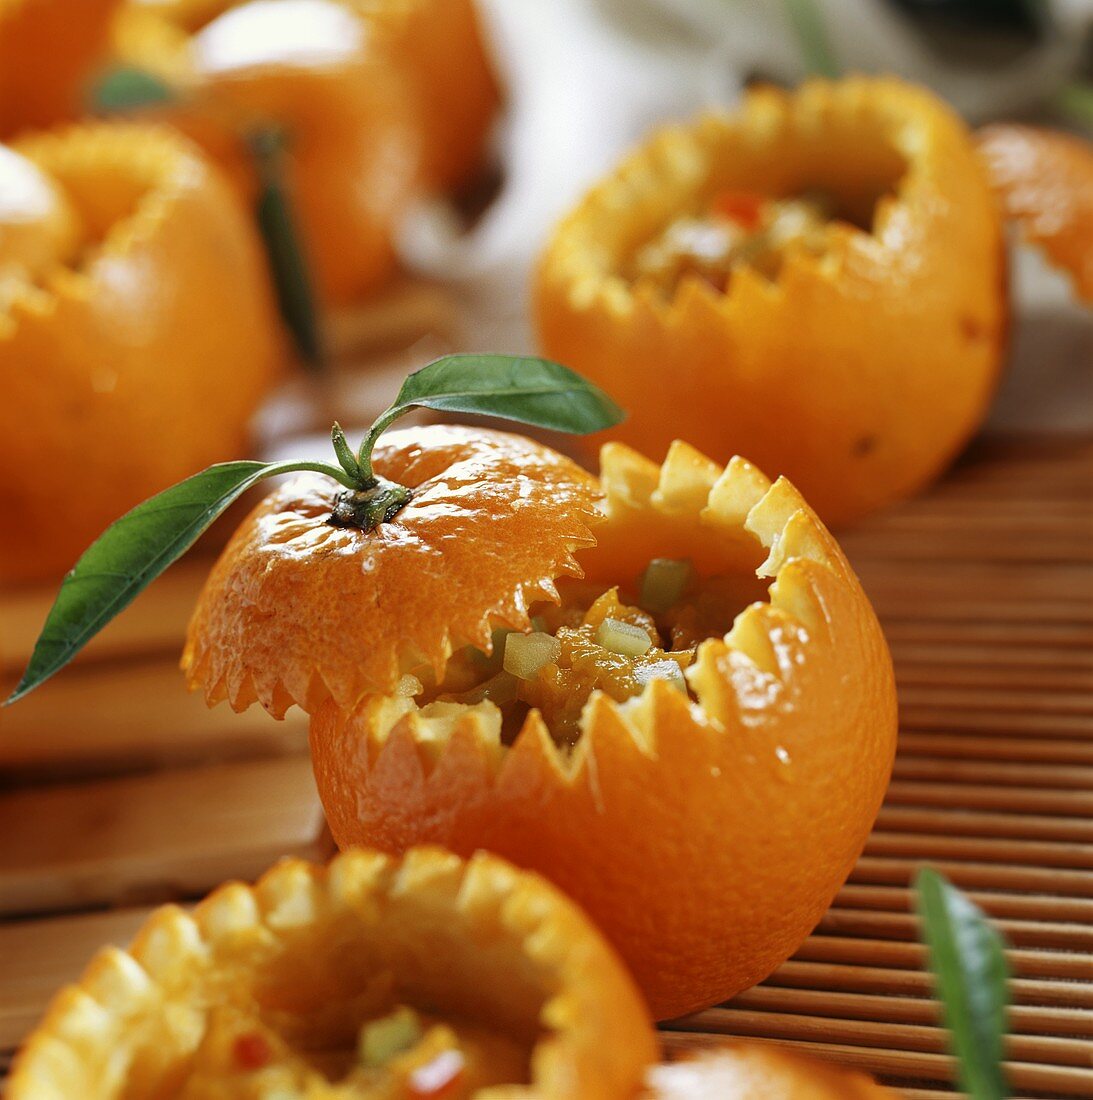 Pumpkin puree in hollowed-out oranges (Sichuan, China)